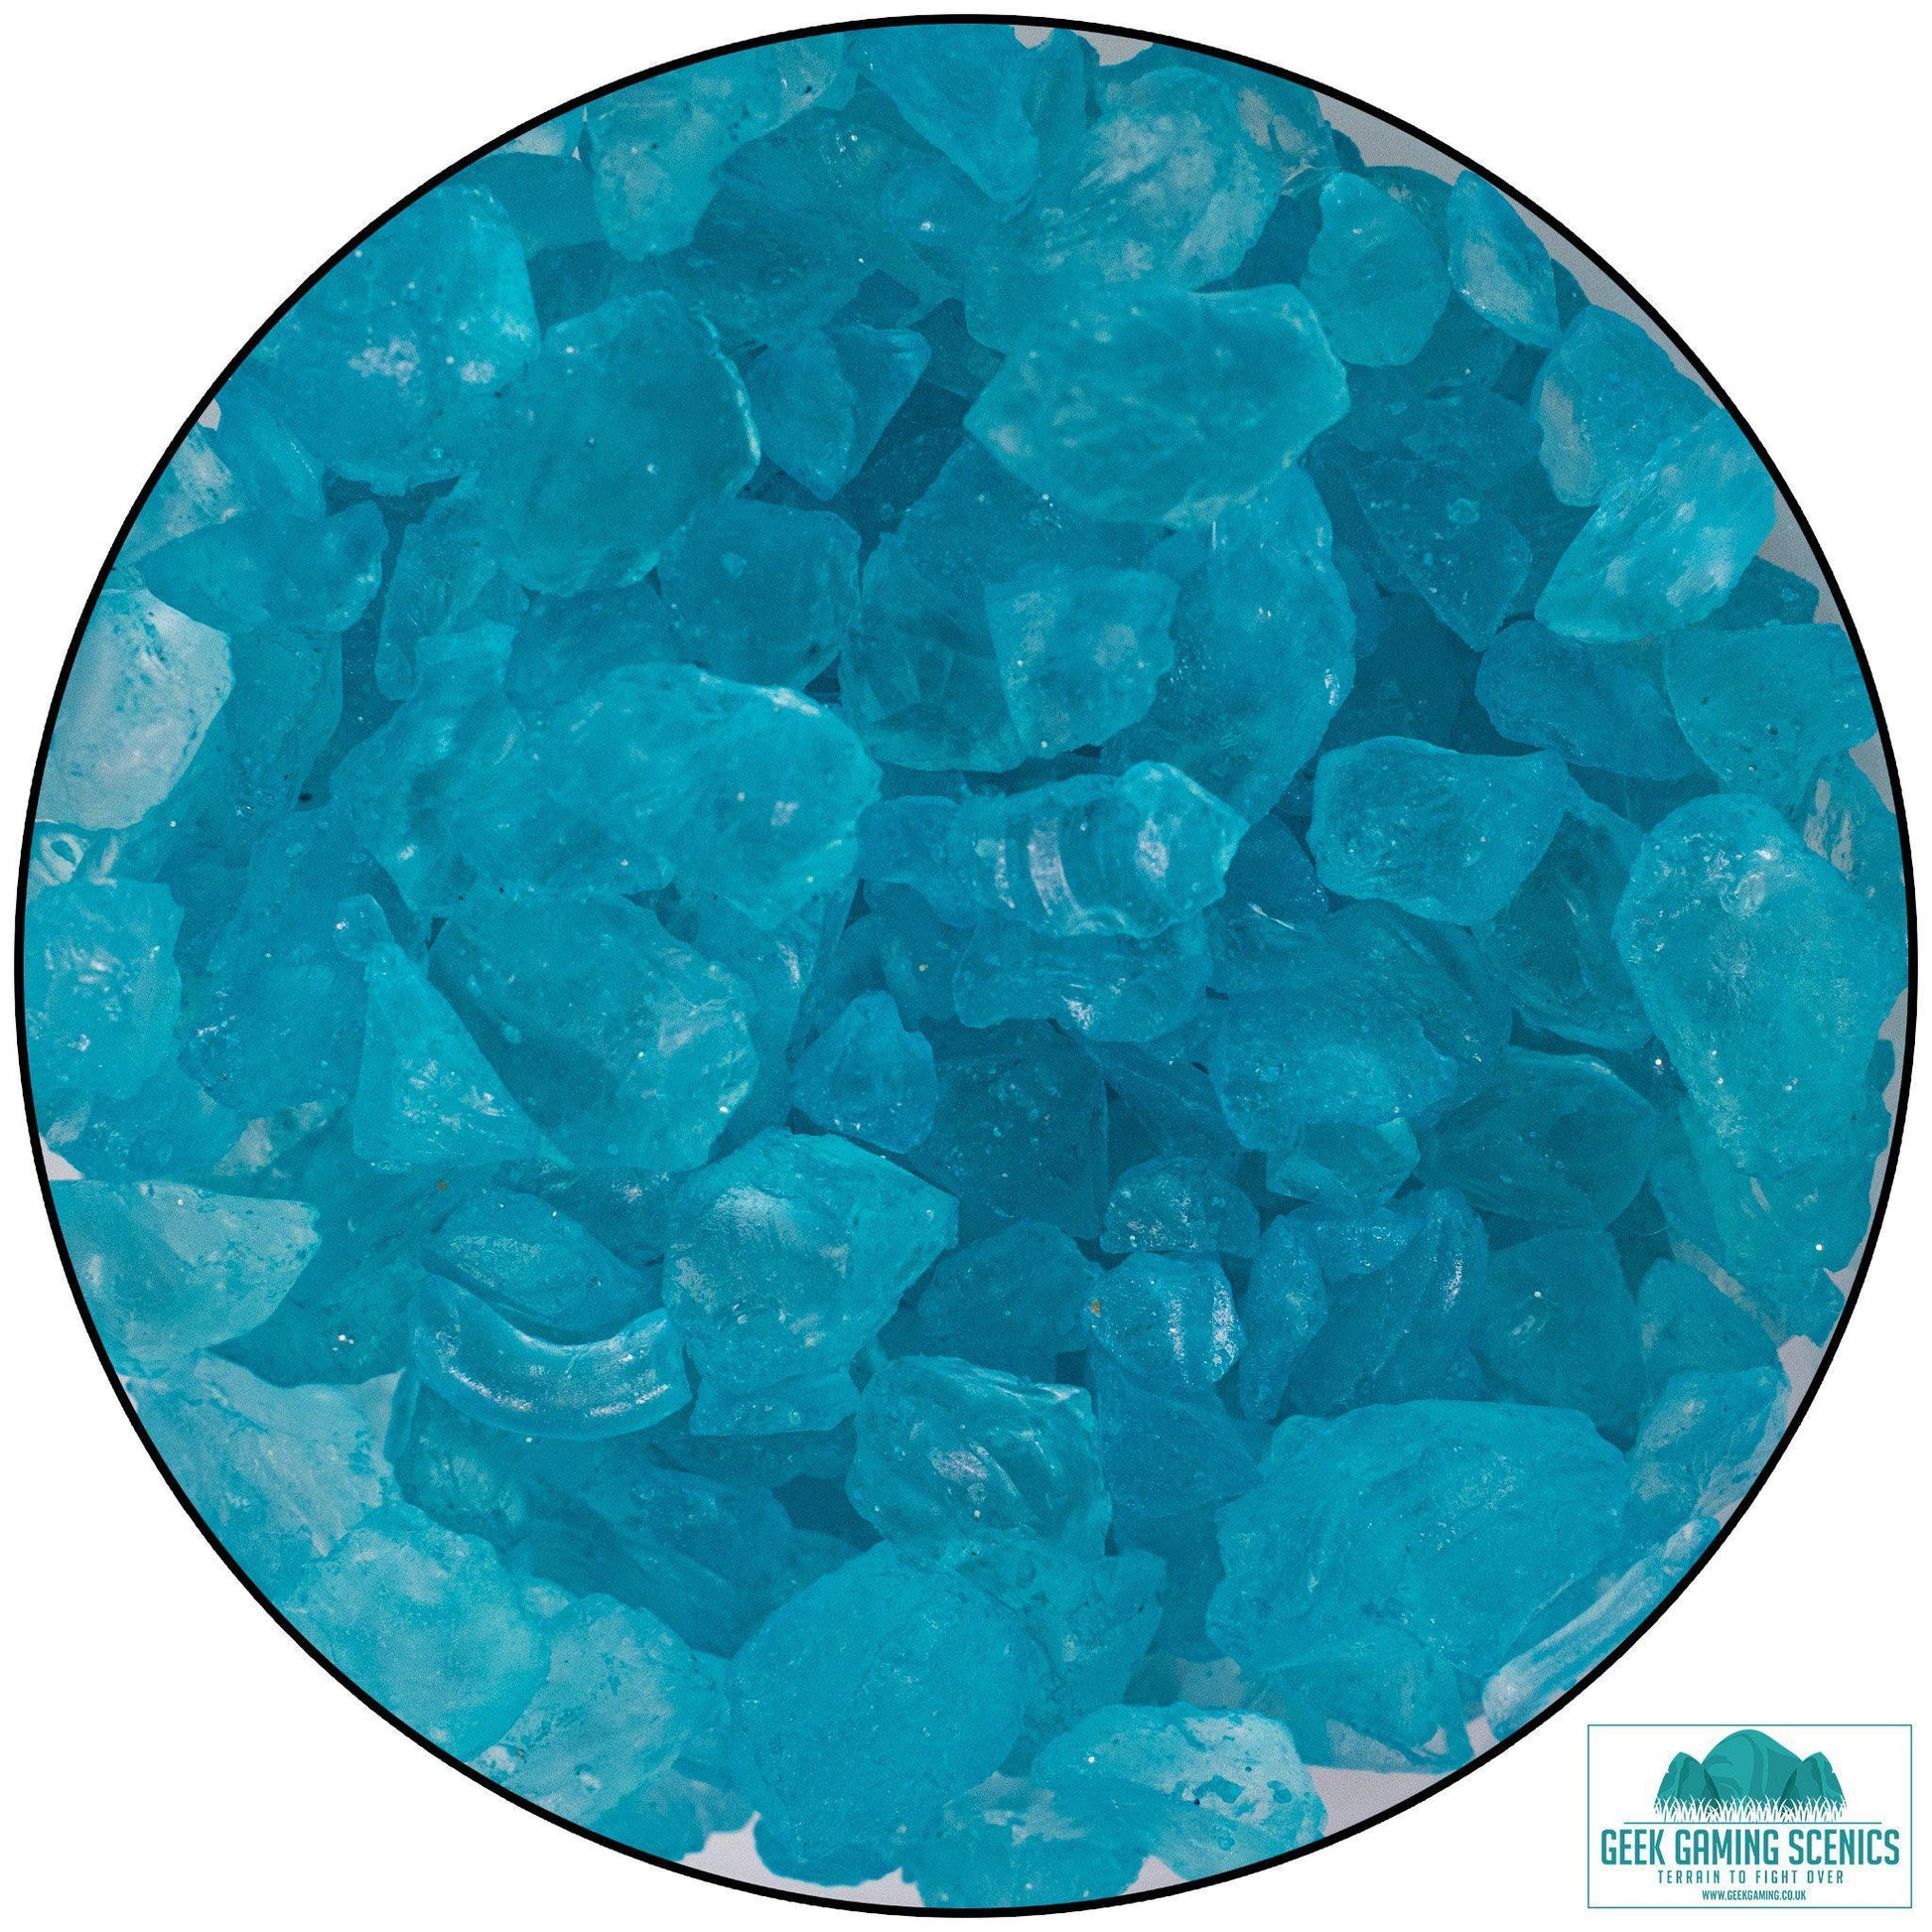 Weird Crystals Large - Turquoise - Geek Gaming Scenics